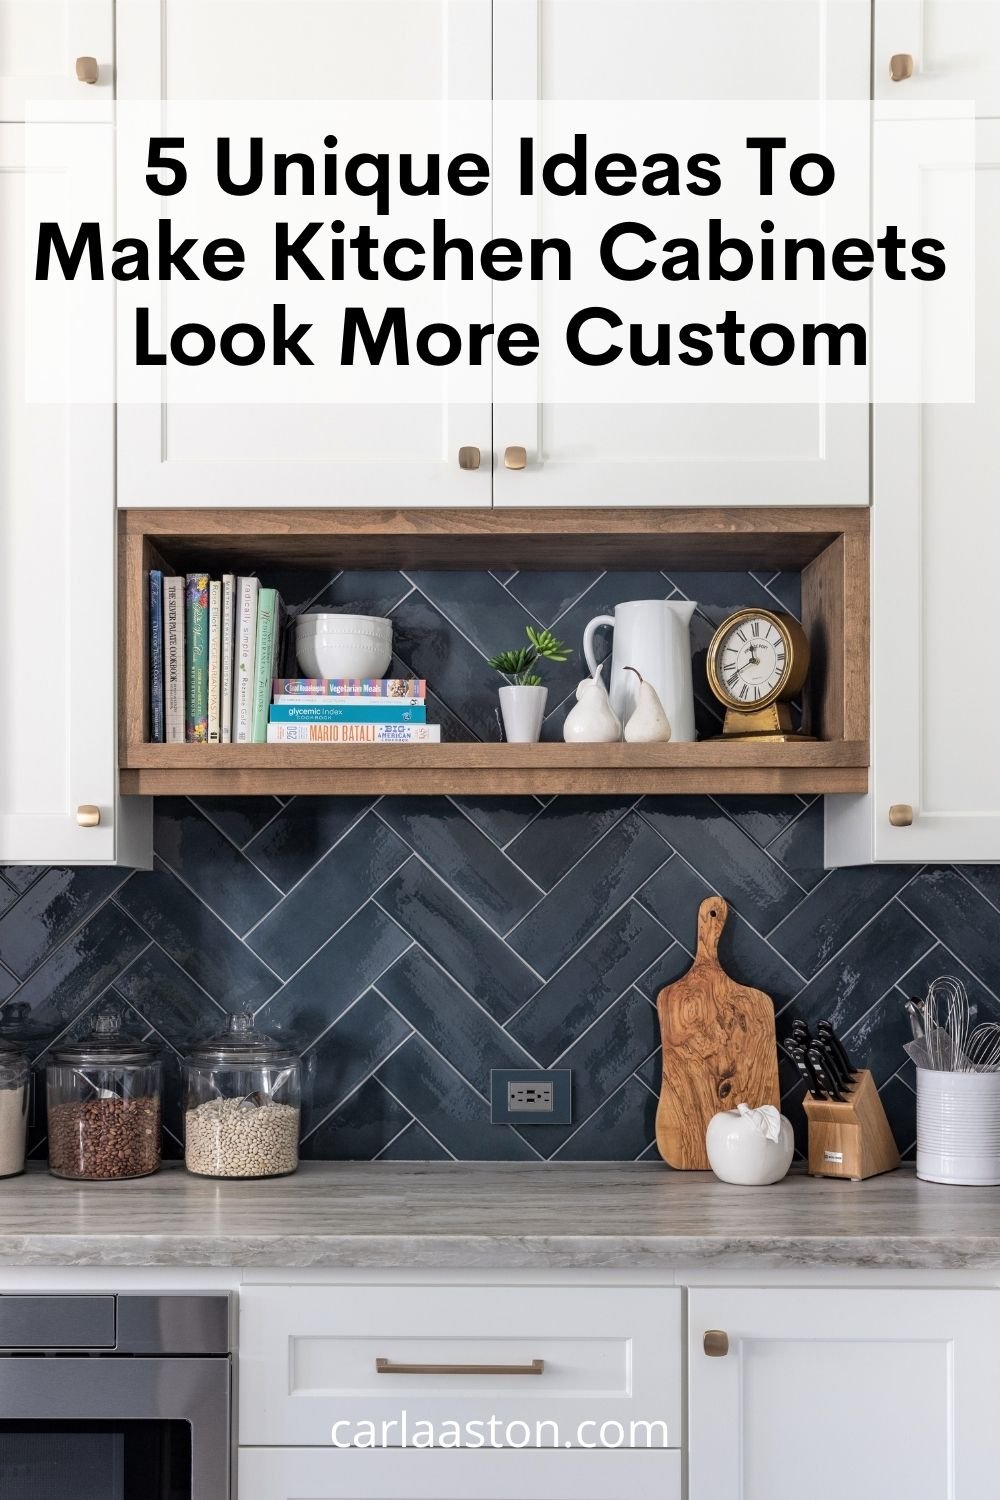 Kitchen Cabinets Look More Custom